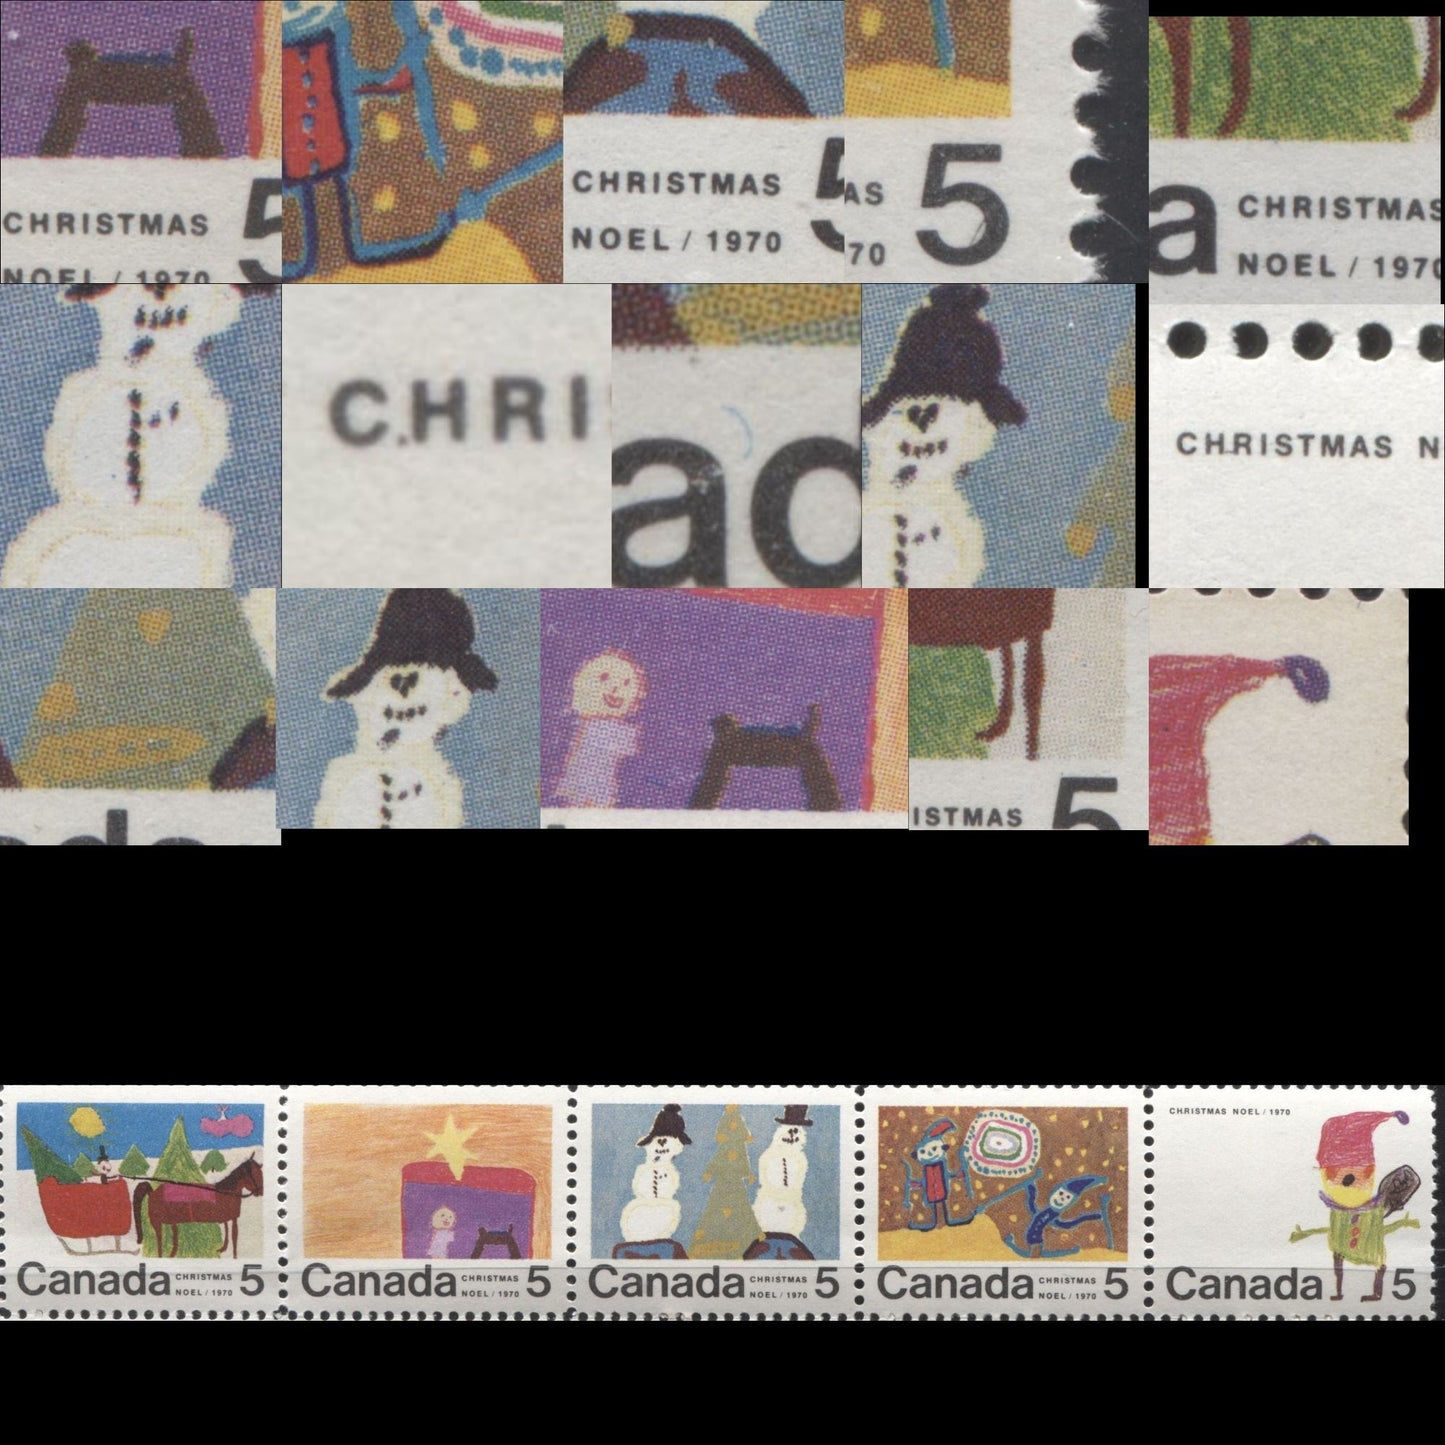 Lot 145 Canada #519p-523p 5c Multicoloured 1970 Christmas Issue, A Complete Set of 15 Winnipeg Tagged Constant Plate Varieties From Combination 3, Ribbed HB11 Paper, Perf. 11.9